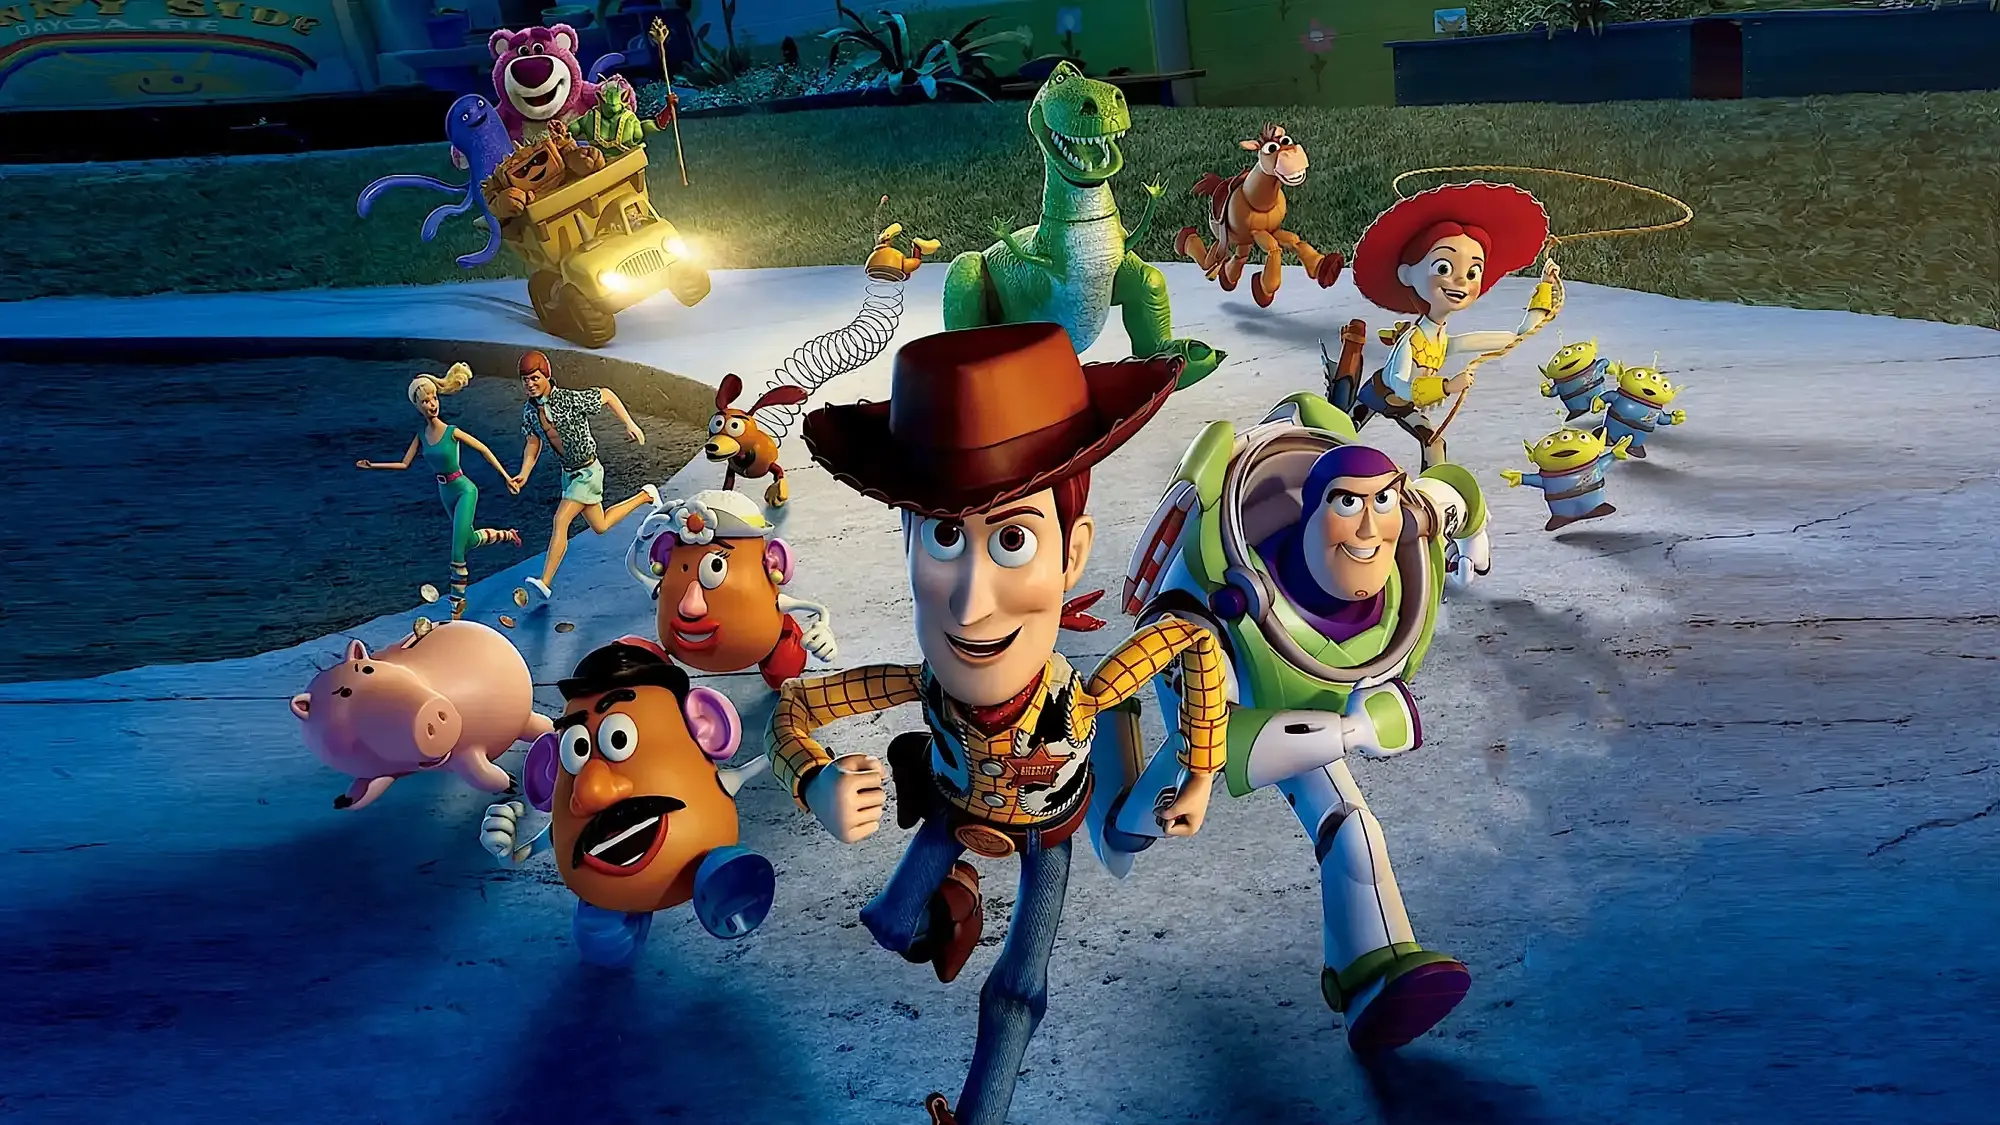 Toy Story 3 movie review